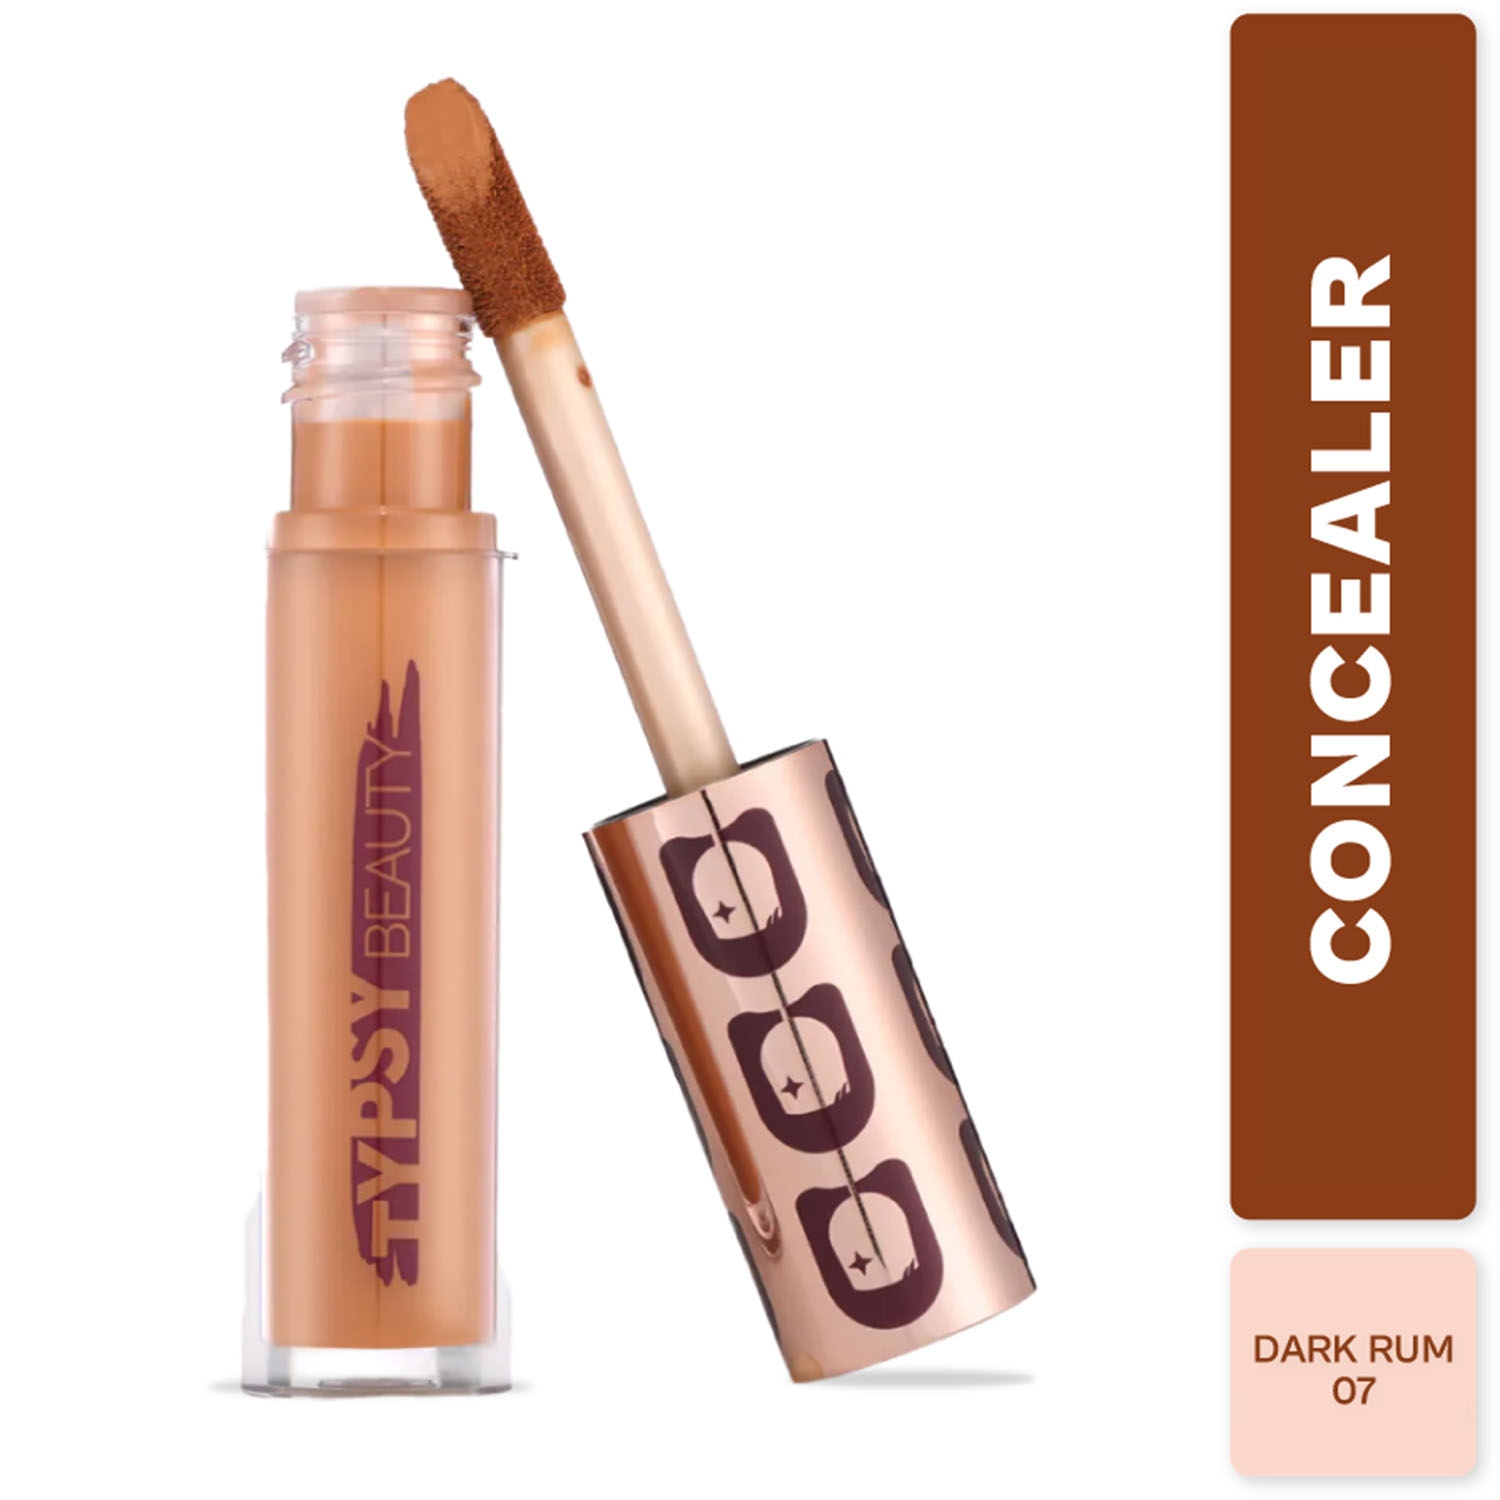 Typsy Beauty | Typsy Beauty Hangover Proof Full Coverage Concealer - 07 Dark Rum (5.8g)